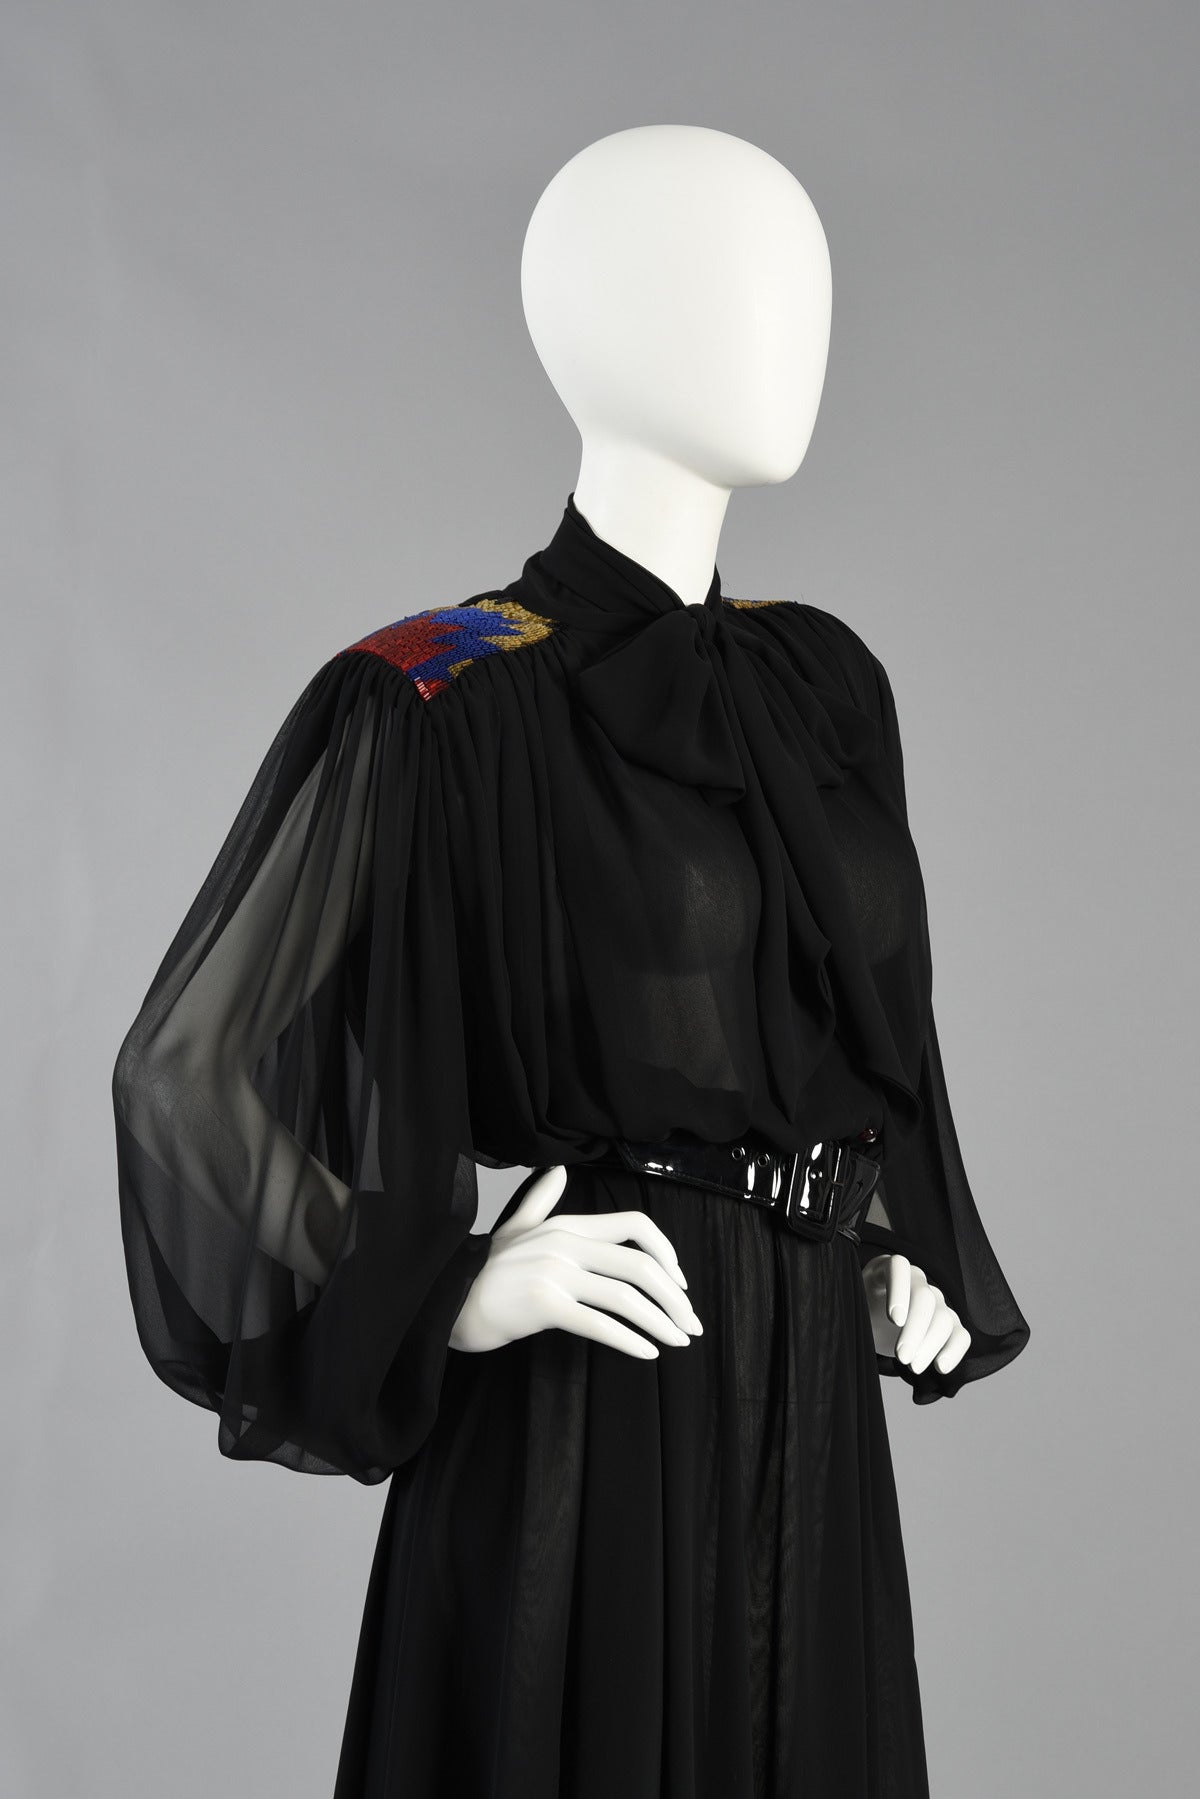 Stunning Wayne Clark Silk Dress with Beaded Details and Blouson Sleeves For Sale 4